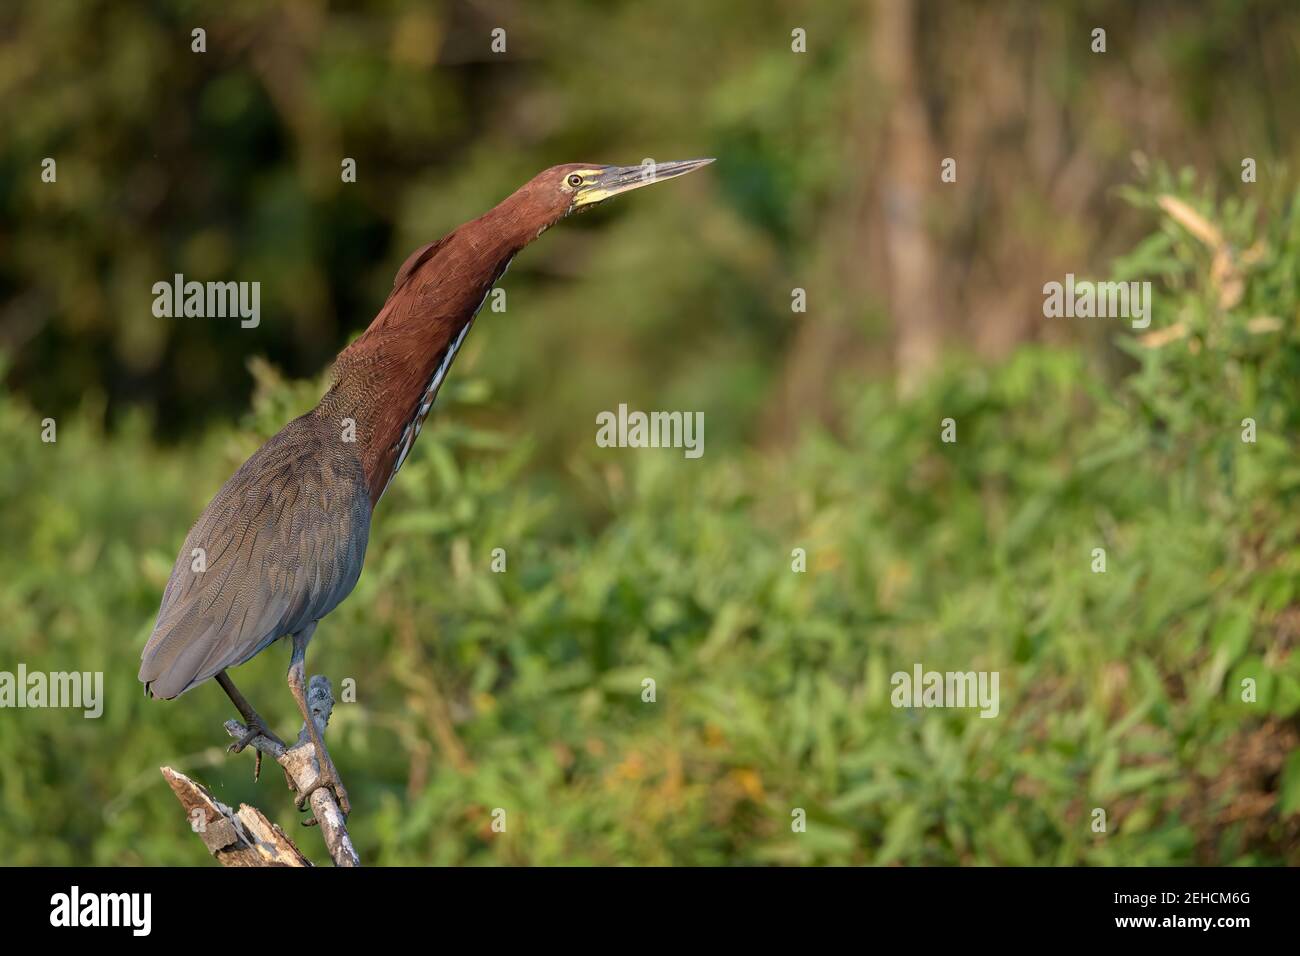 Rufescent tiger heron (Tigrisoma lineatum) perched in wetlands looking right Stock Photo